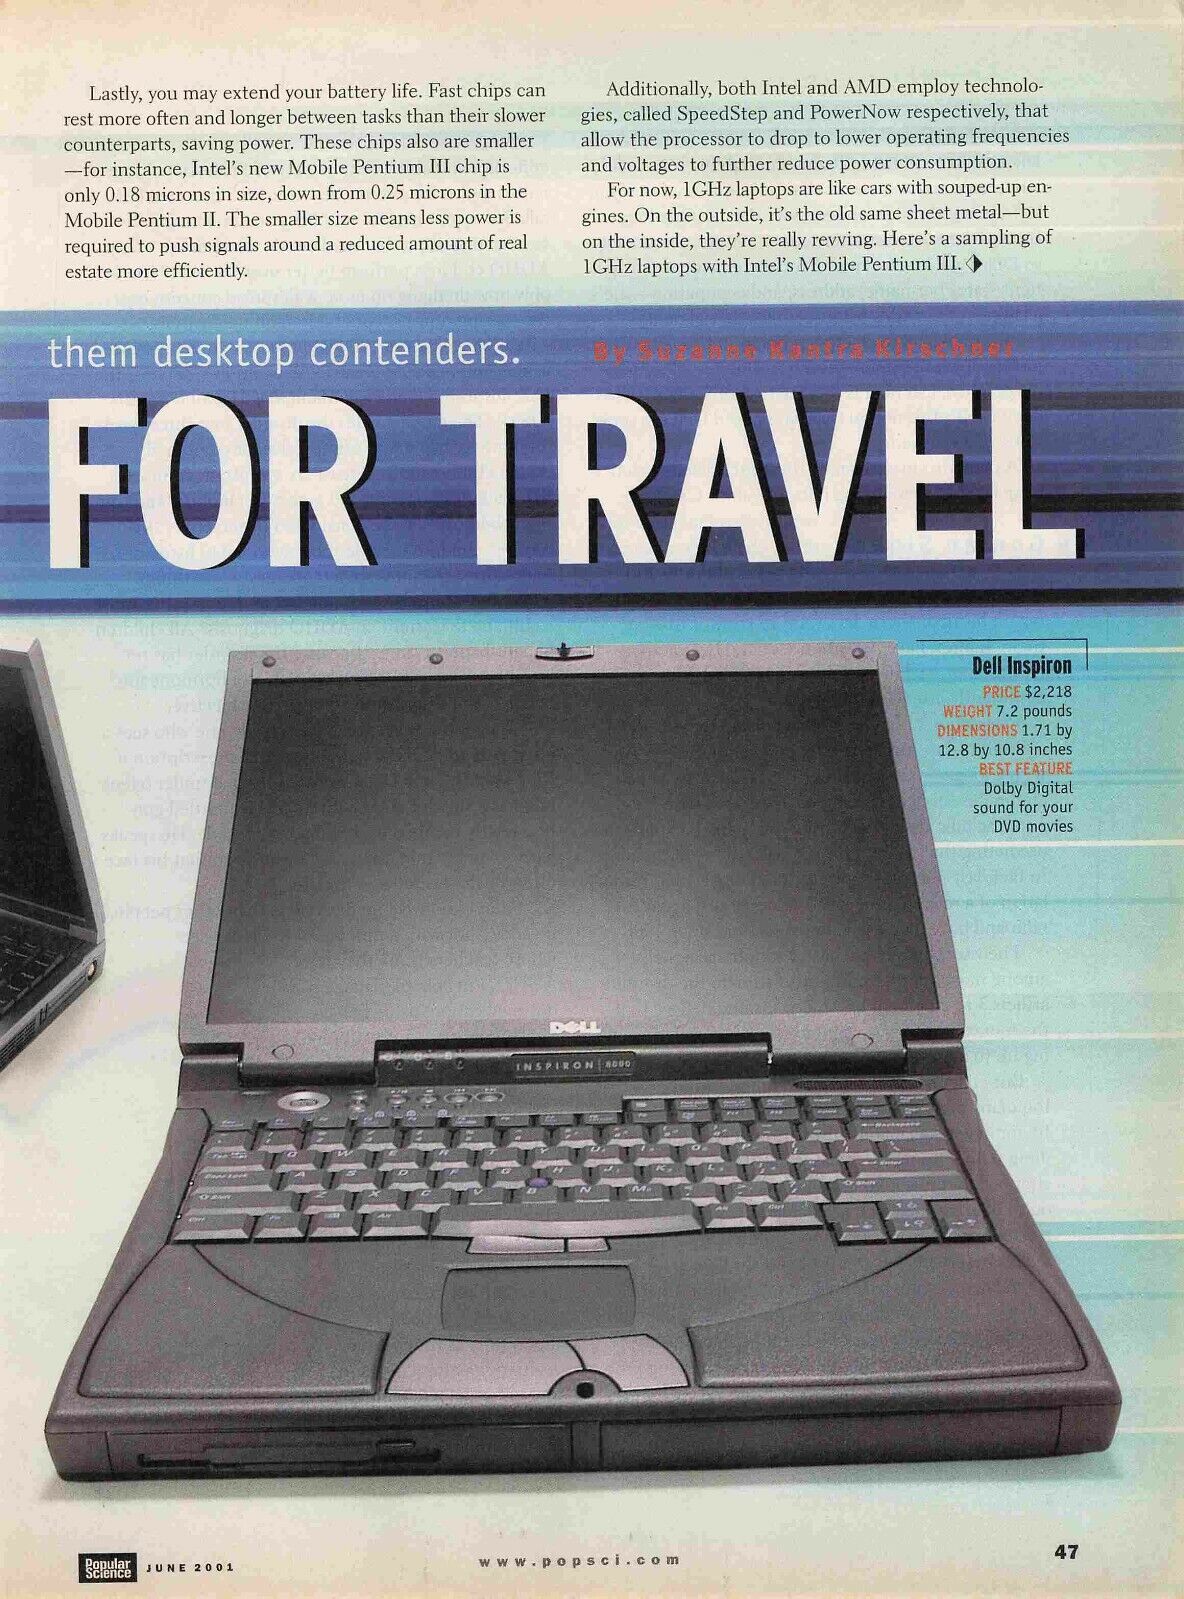 Dell Inspiron Laptop $2218 Y2K 2000S Vtg Print Ad 8X11 Wall Poster Art